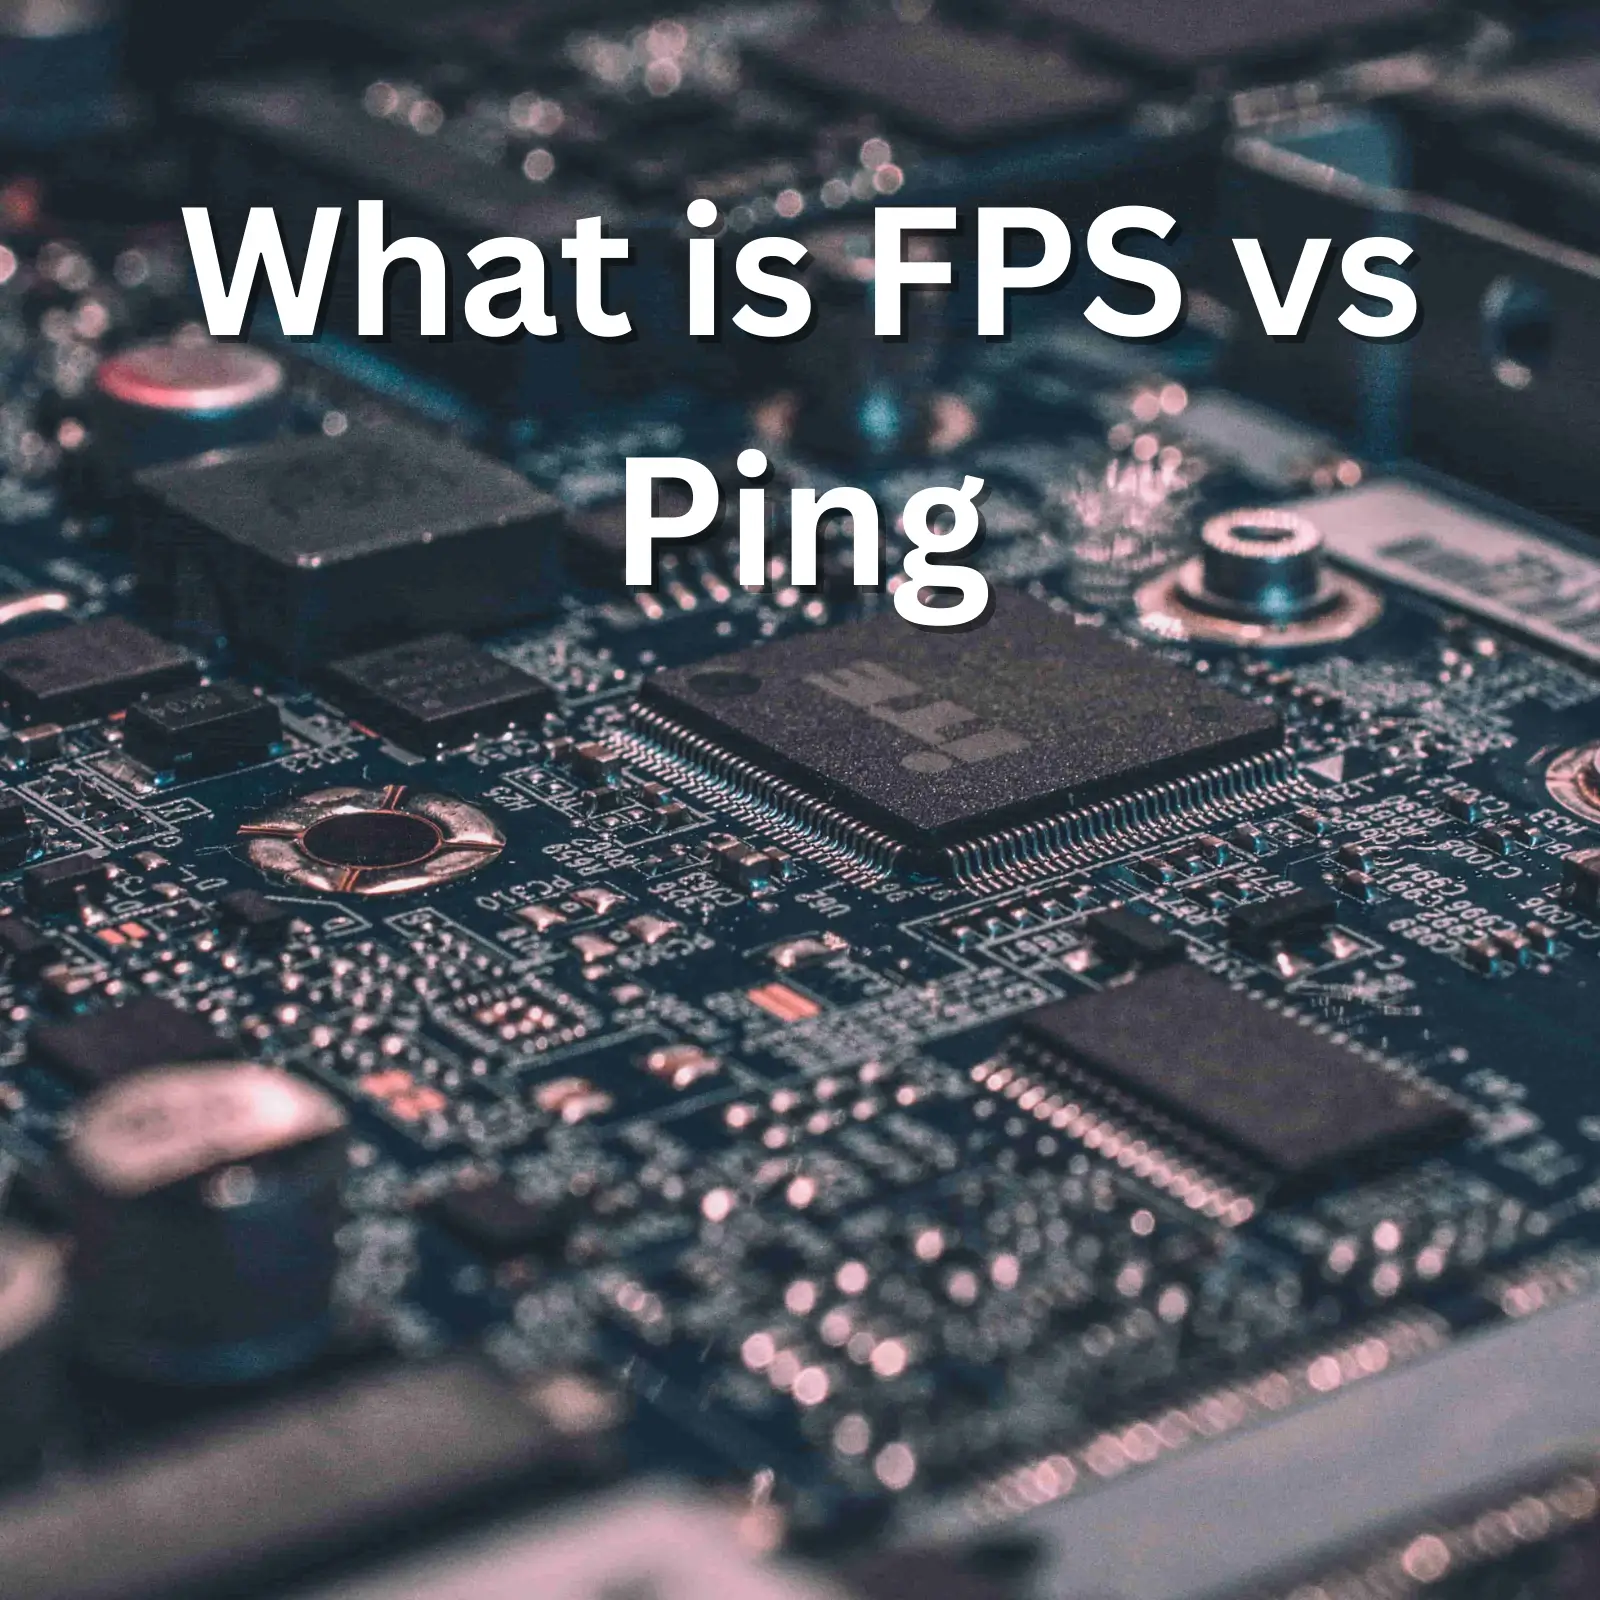 What is FPS vs Ping